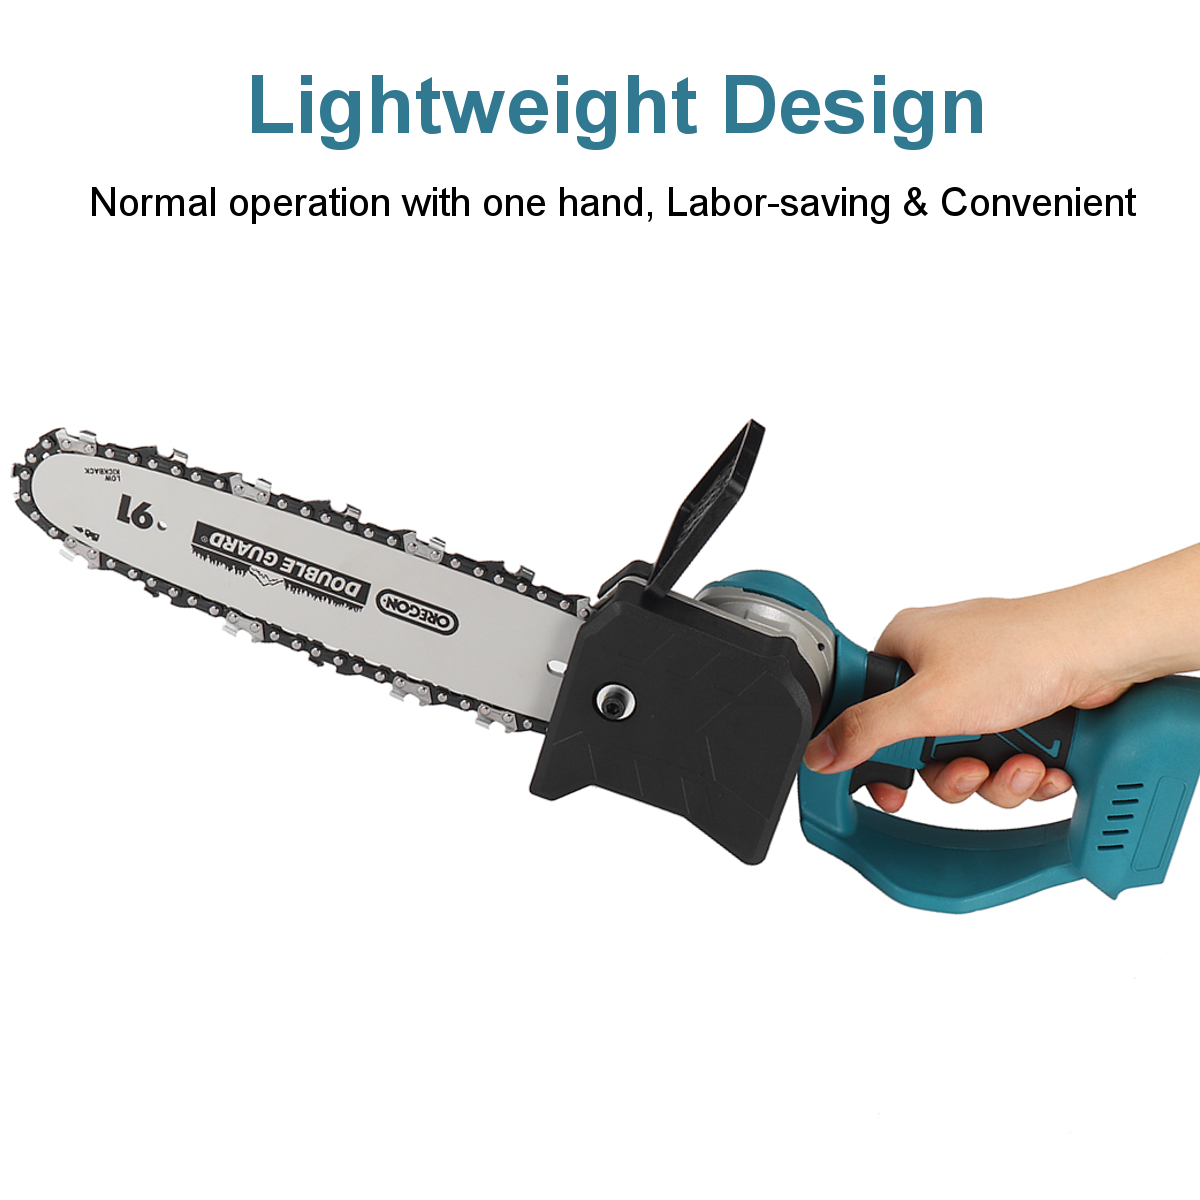 10-Inch-588VF-Electric-Chain-Saw-Woodworking-Tool-Portable-Chainsaws-w-1pc2pcs-Battery-For-Cutting-P-1823938-3